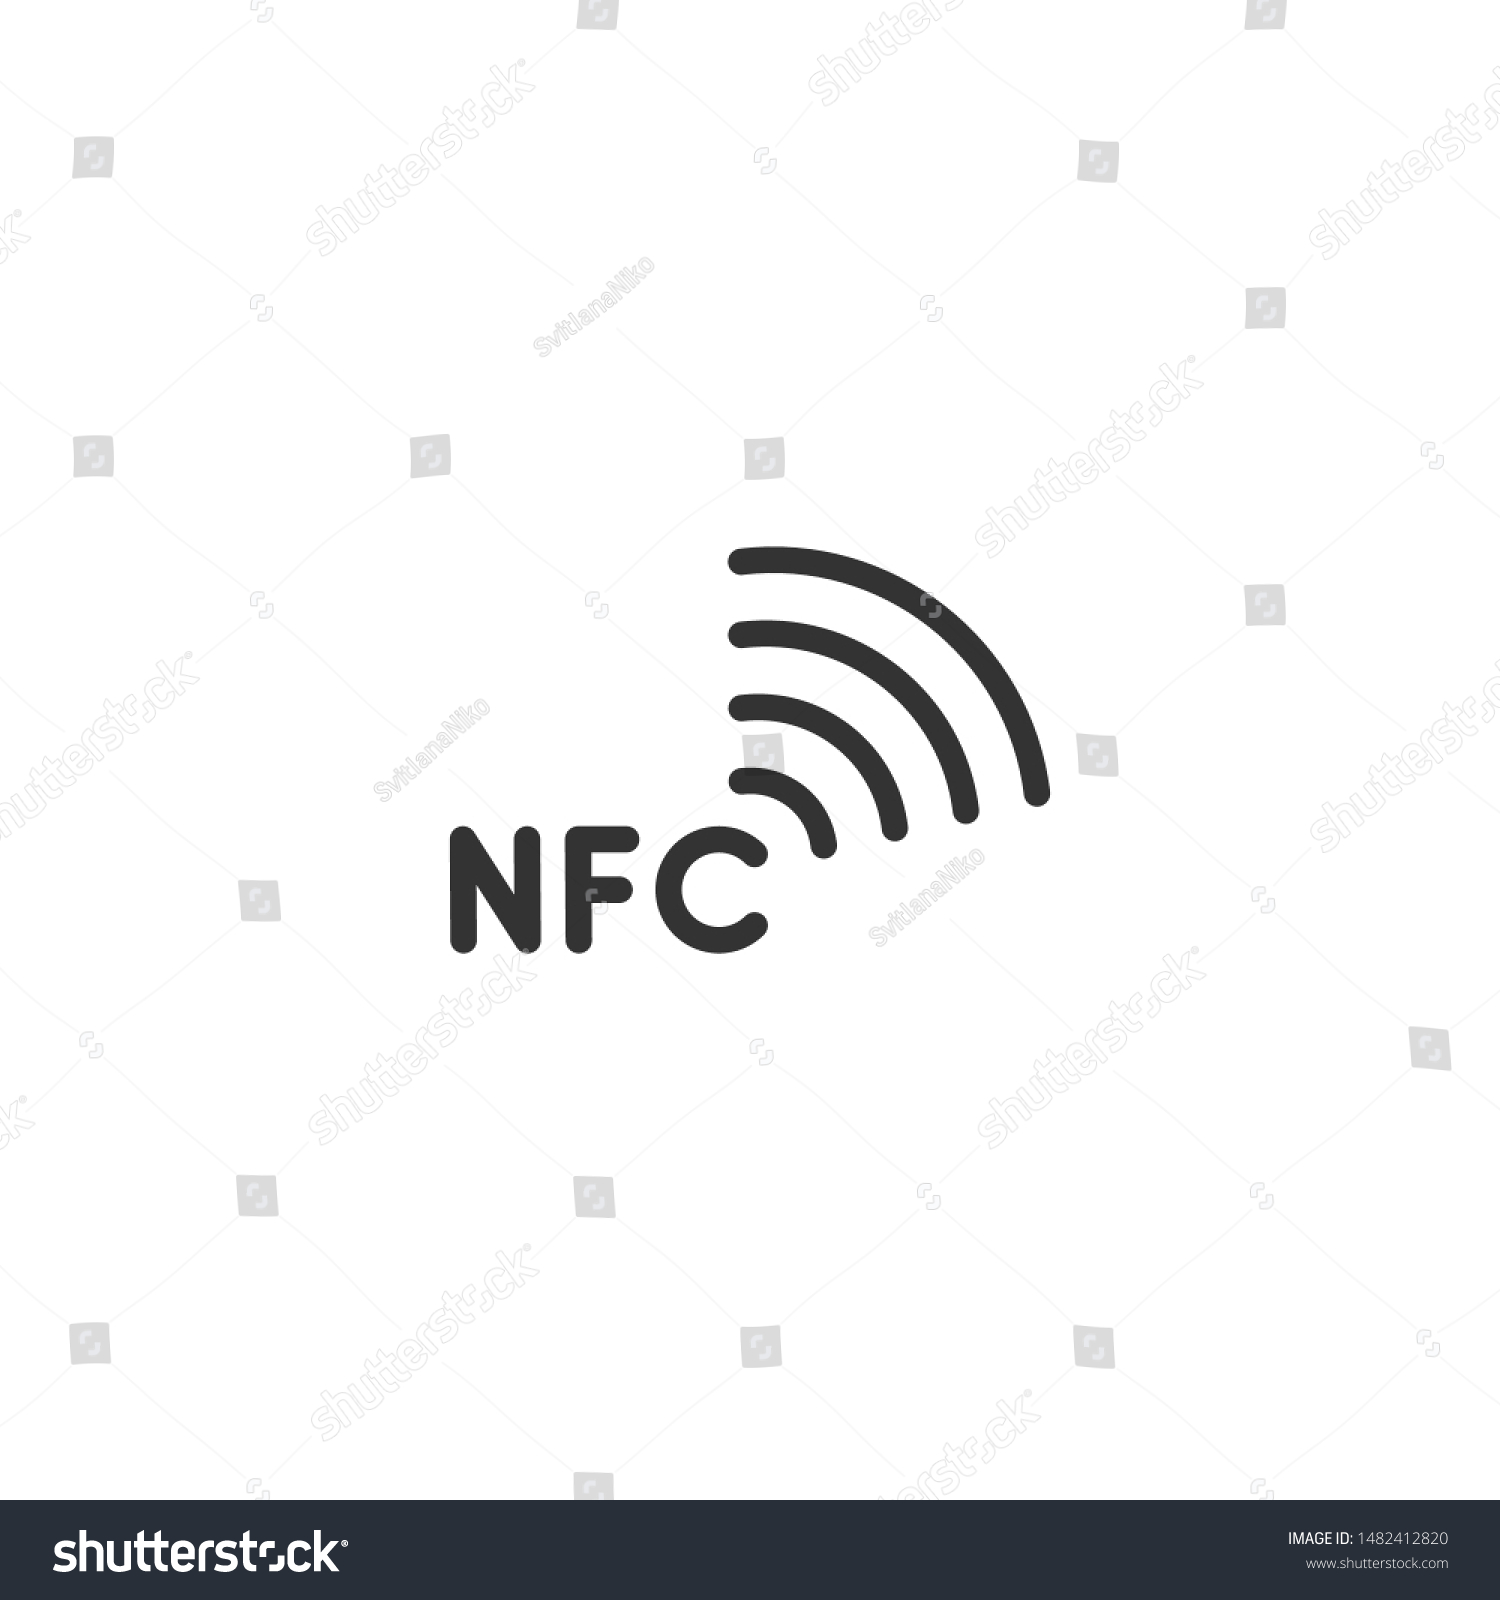 NFC icon. Near field communication sign. NFC letter logo. Contactless payment logo. NFC payments icon for apps. #1482412820